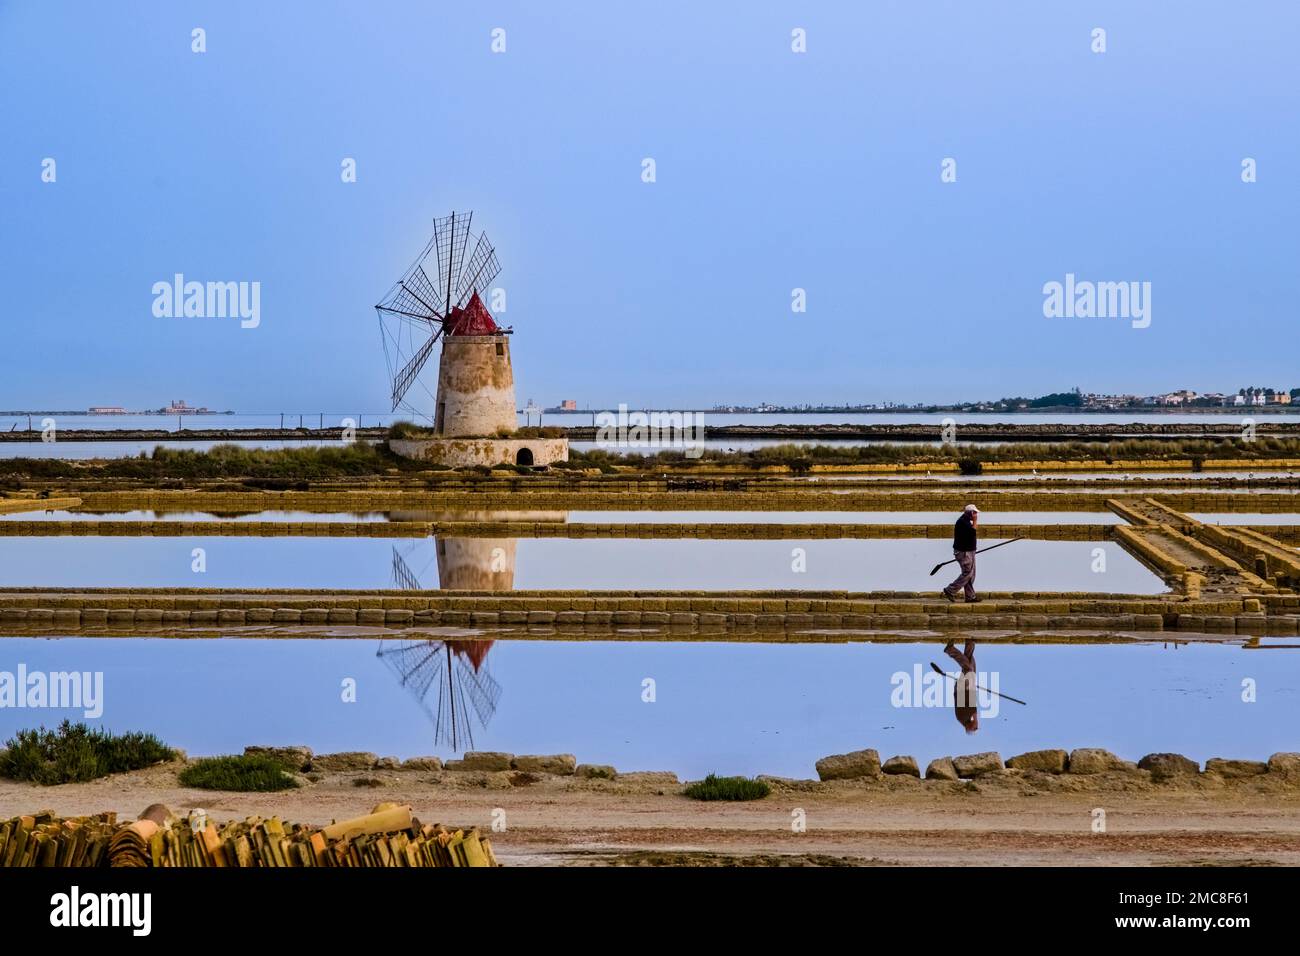 Water basins, salt pans and a windmill at Mozia salt works, a worker is walking on a dam. Stock Photo